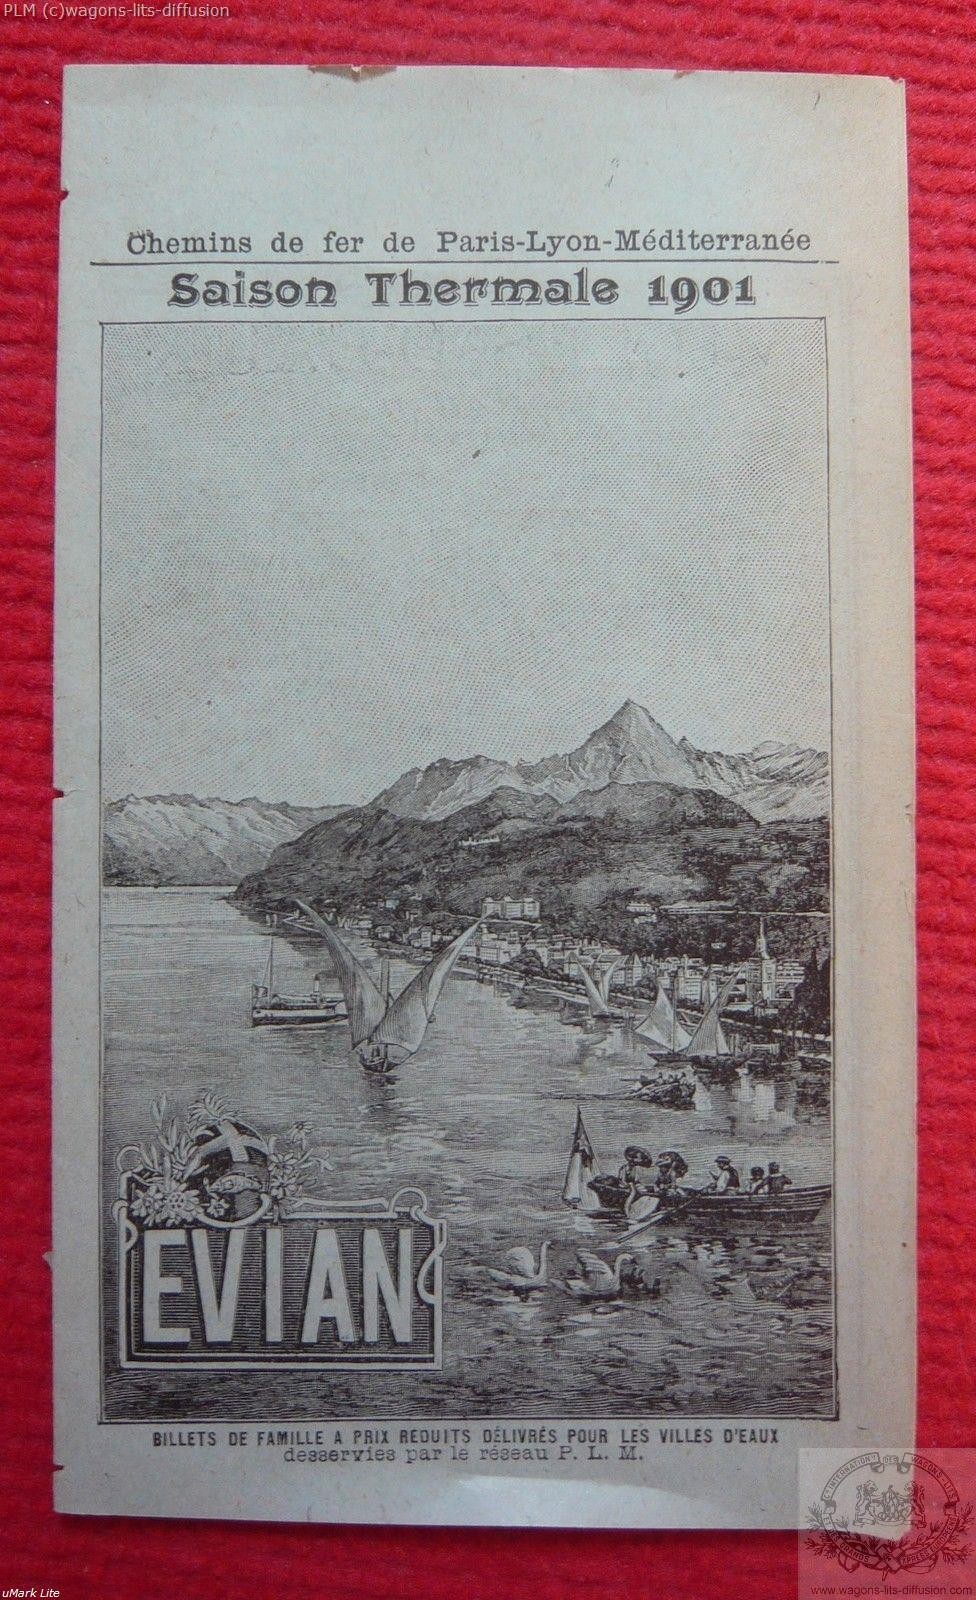 Plm evian station thermale 1901